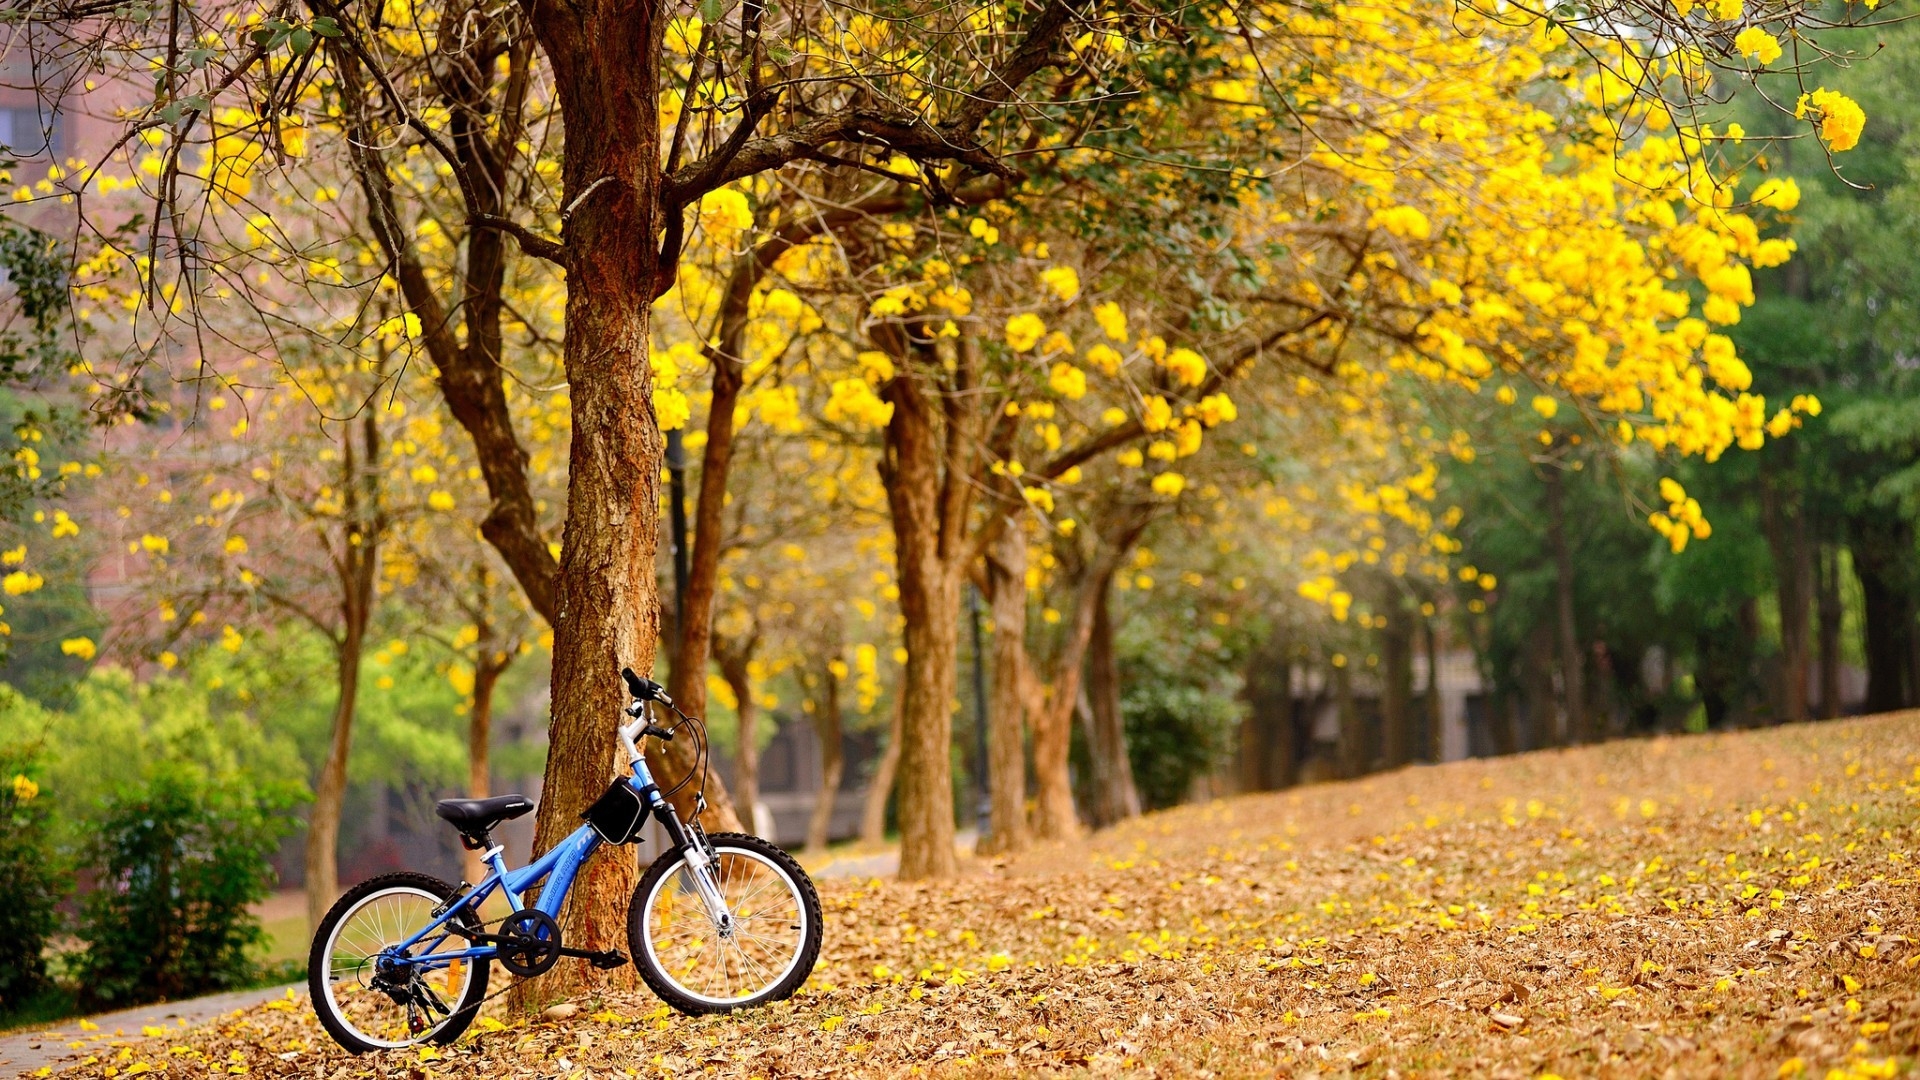 Bike in The Park for 1920 x 1080 HDTV 1080p resolution